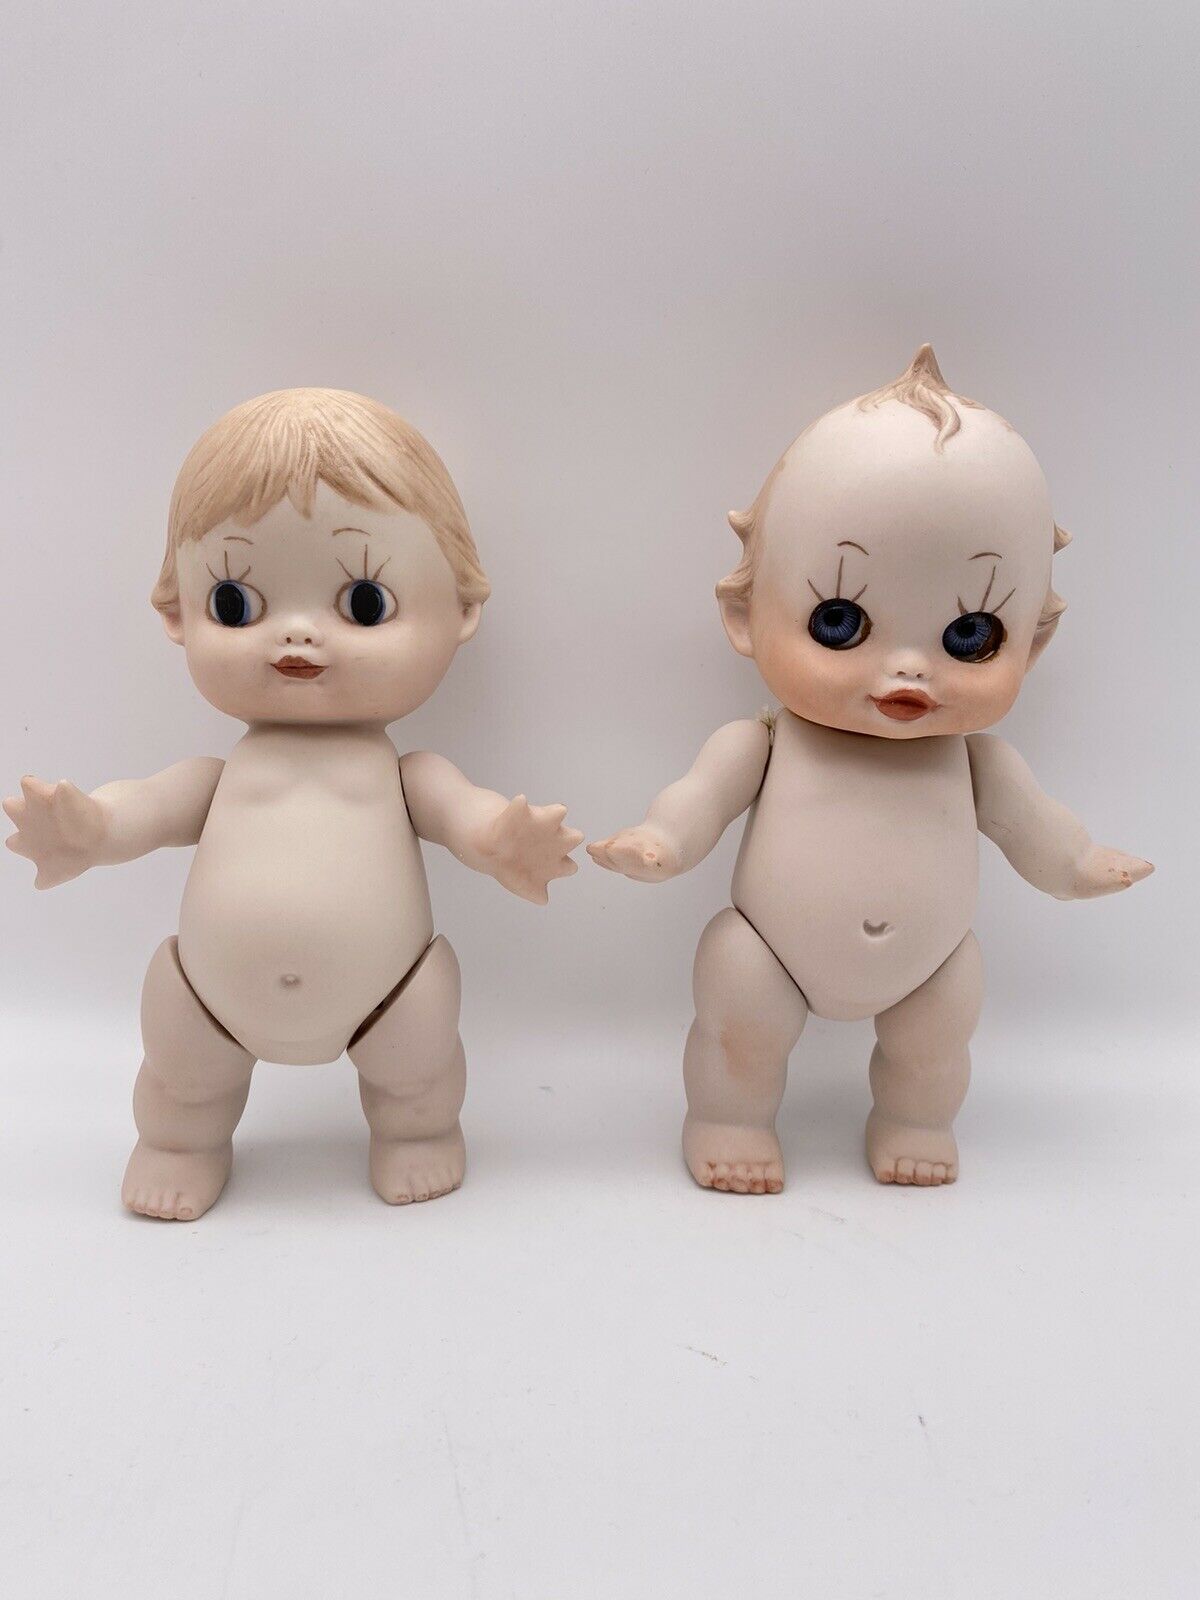 Vintage Bisque Kewpie Doll Lot Of 2 Both 6.5” Byron Mold Girl, Boy Unmarked